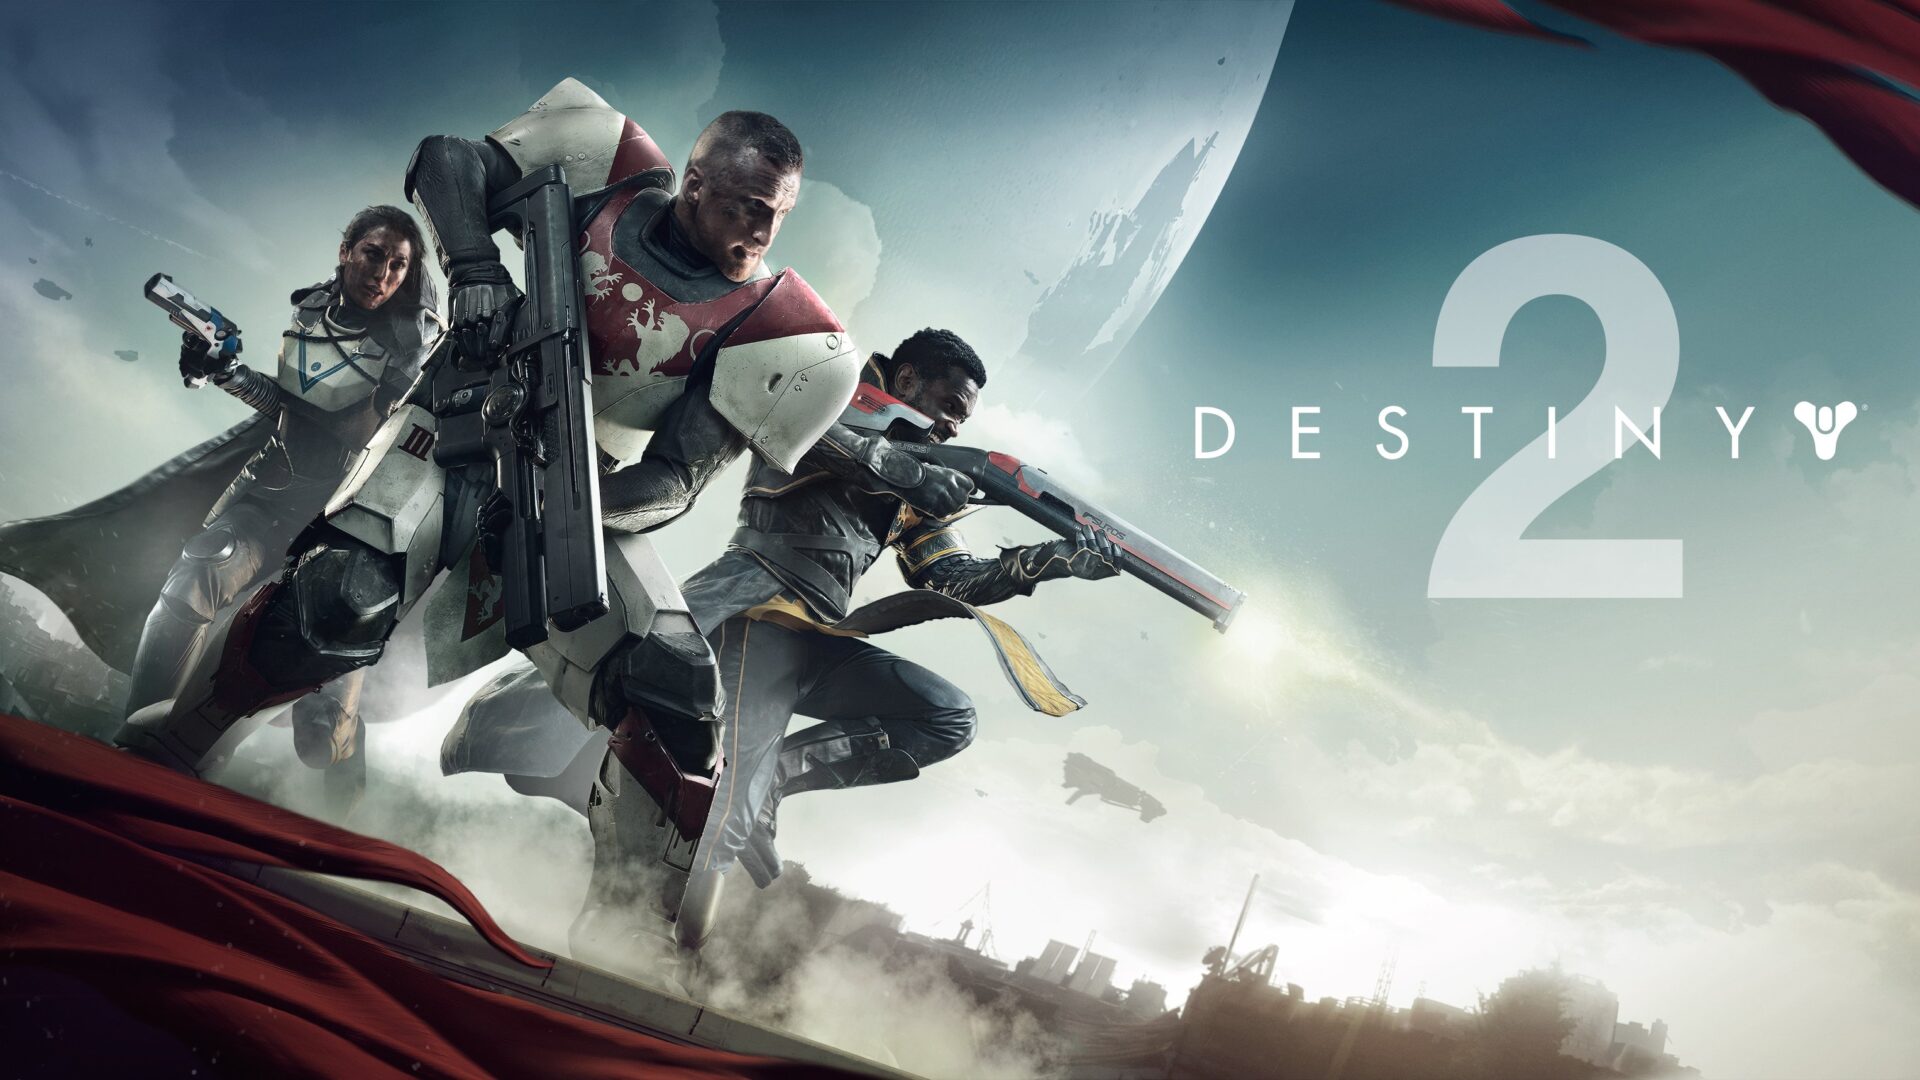 Image is the poster of Destiny2 video game. It is three characters with gun focusing in different directions